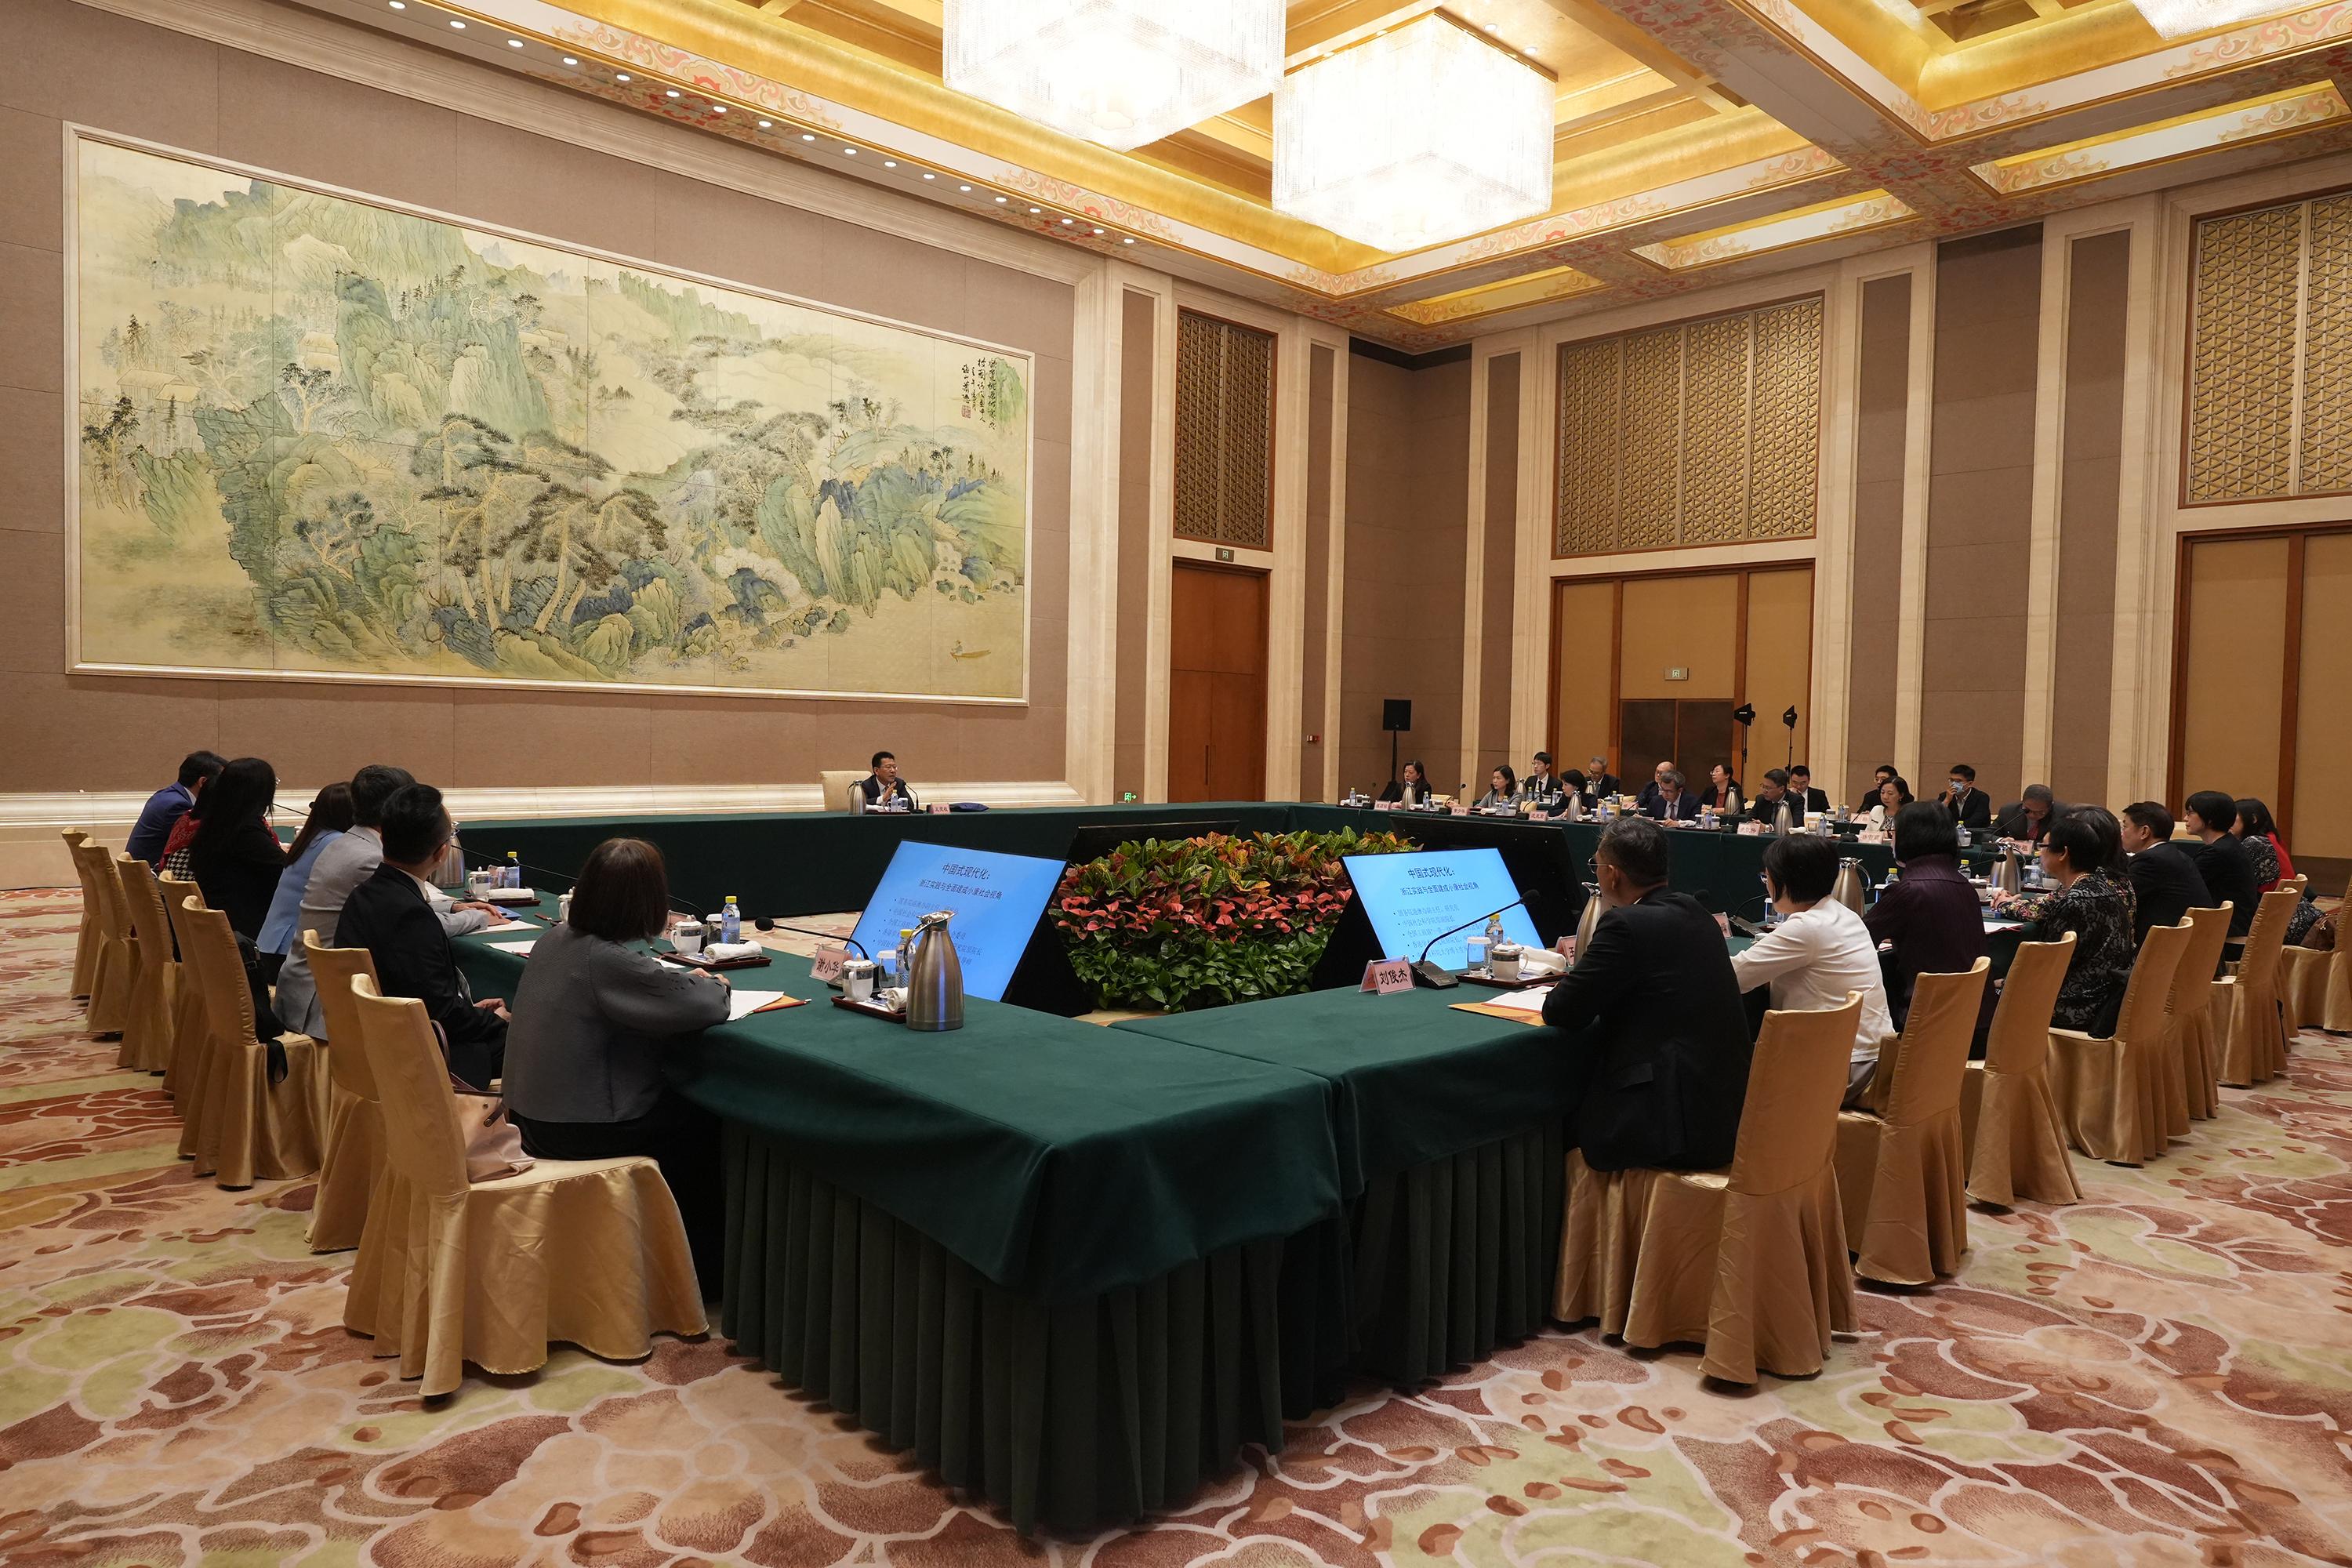 Deputy Director of the Hong Kong and Macao Affairs Office of the State Council Mr Wang Linggui, delivered a lecture on Chinese-style modernisation to Permanent Secretaries and Heads of Departments of the Hong Kong Special Administrative Region Government this afternoon (June 26).